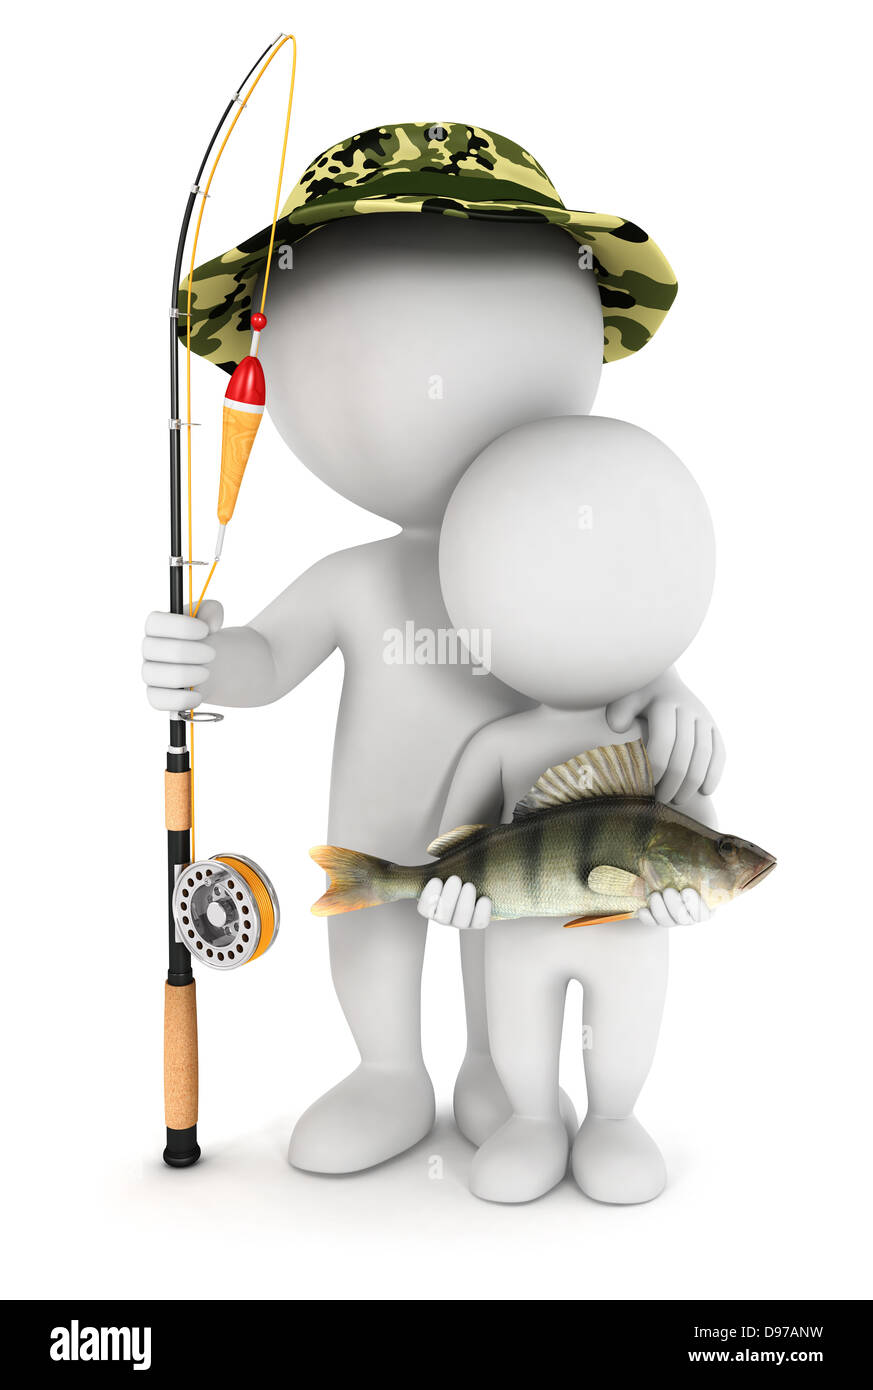 575 Miniature People Fishing Images, Stock Photos, 3D objects, & Vectors